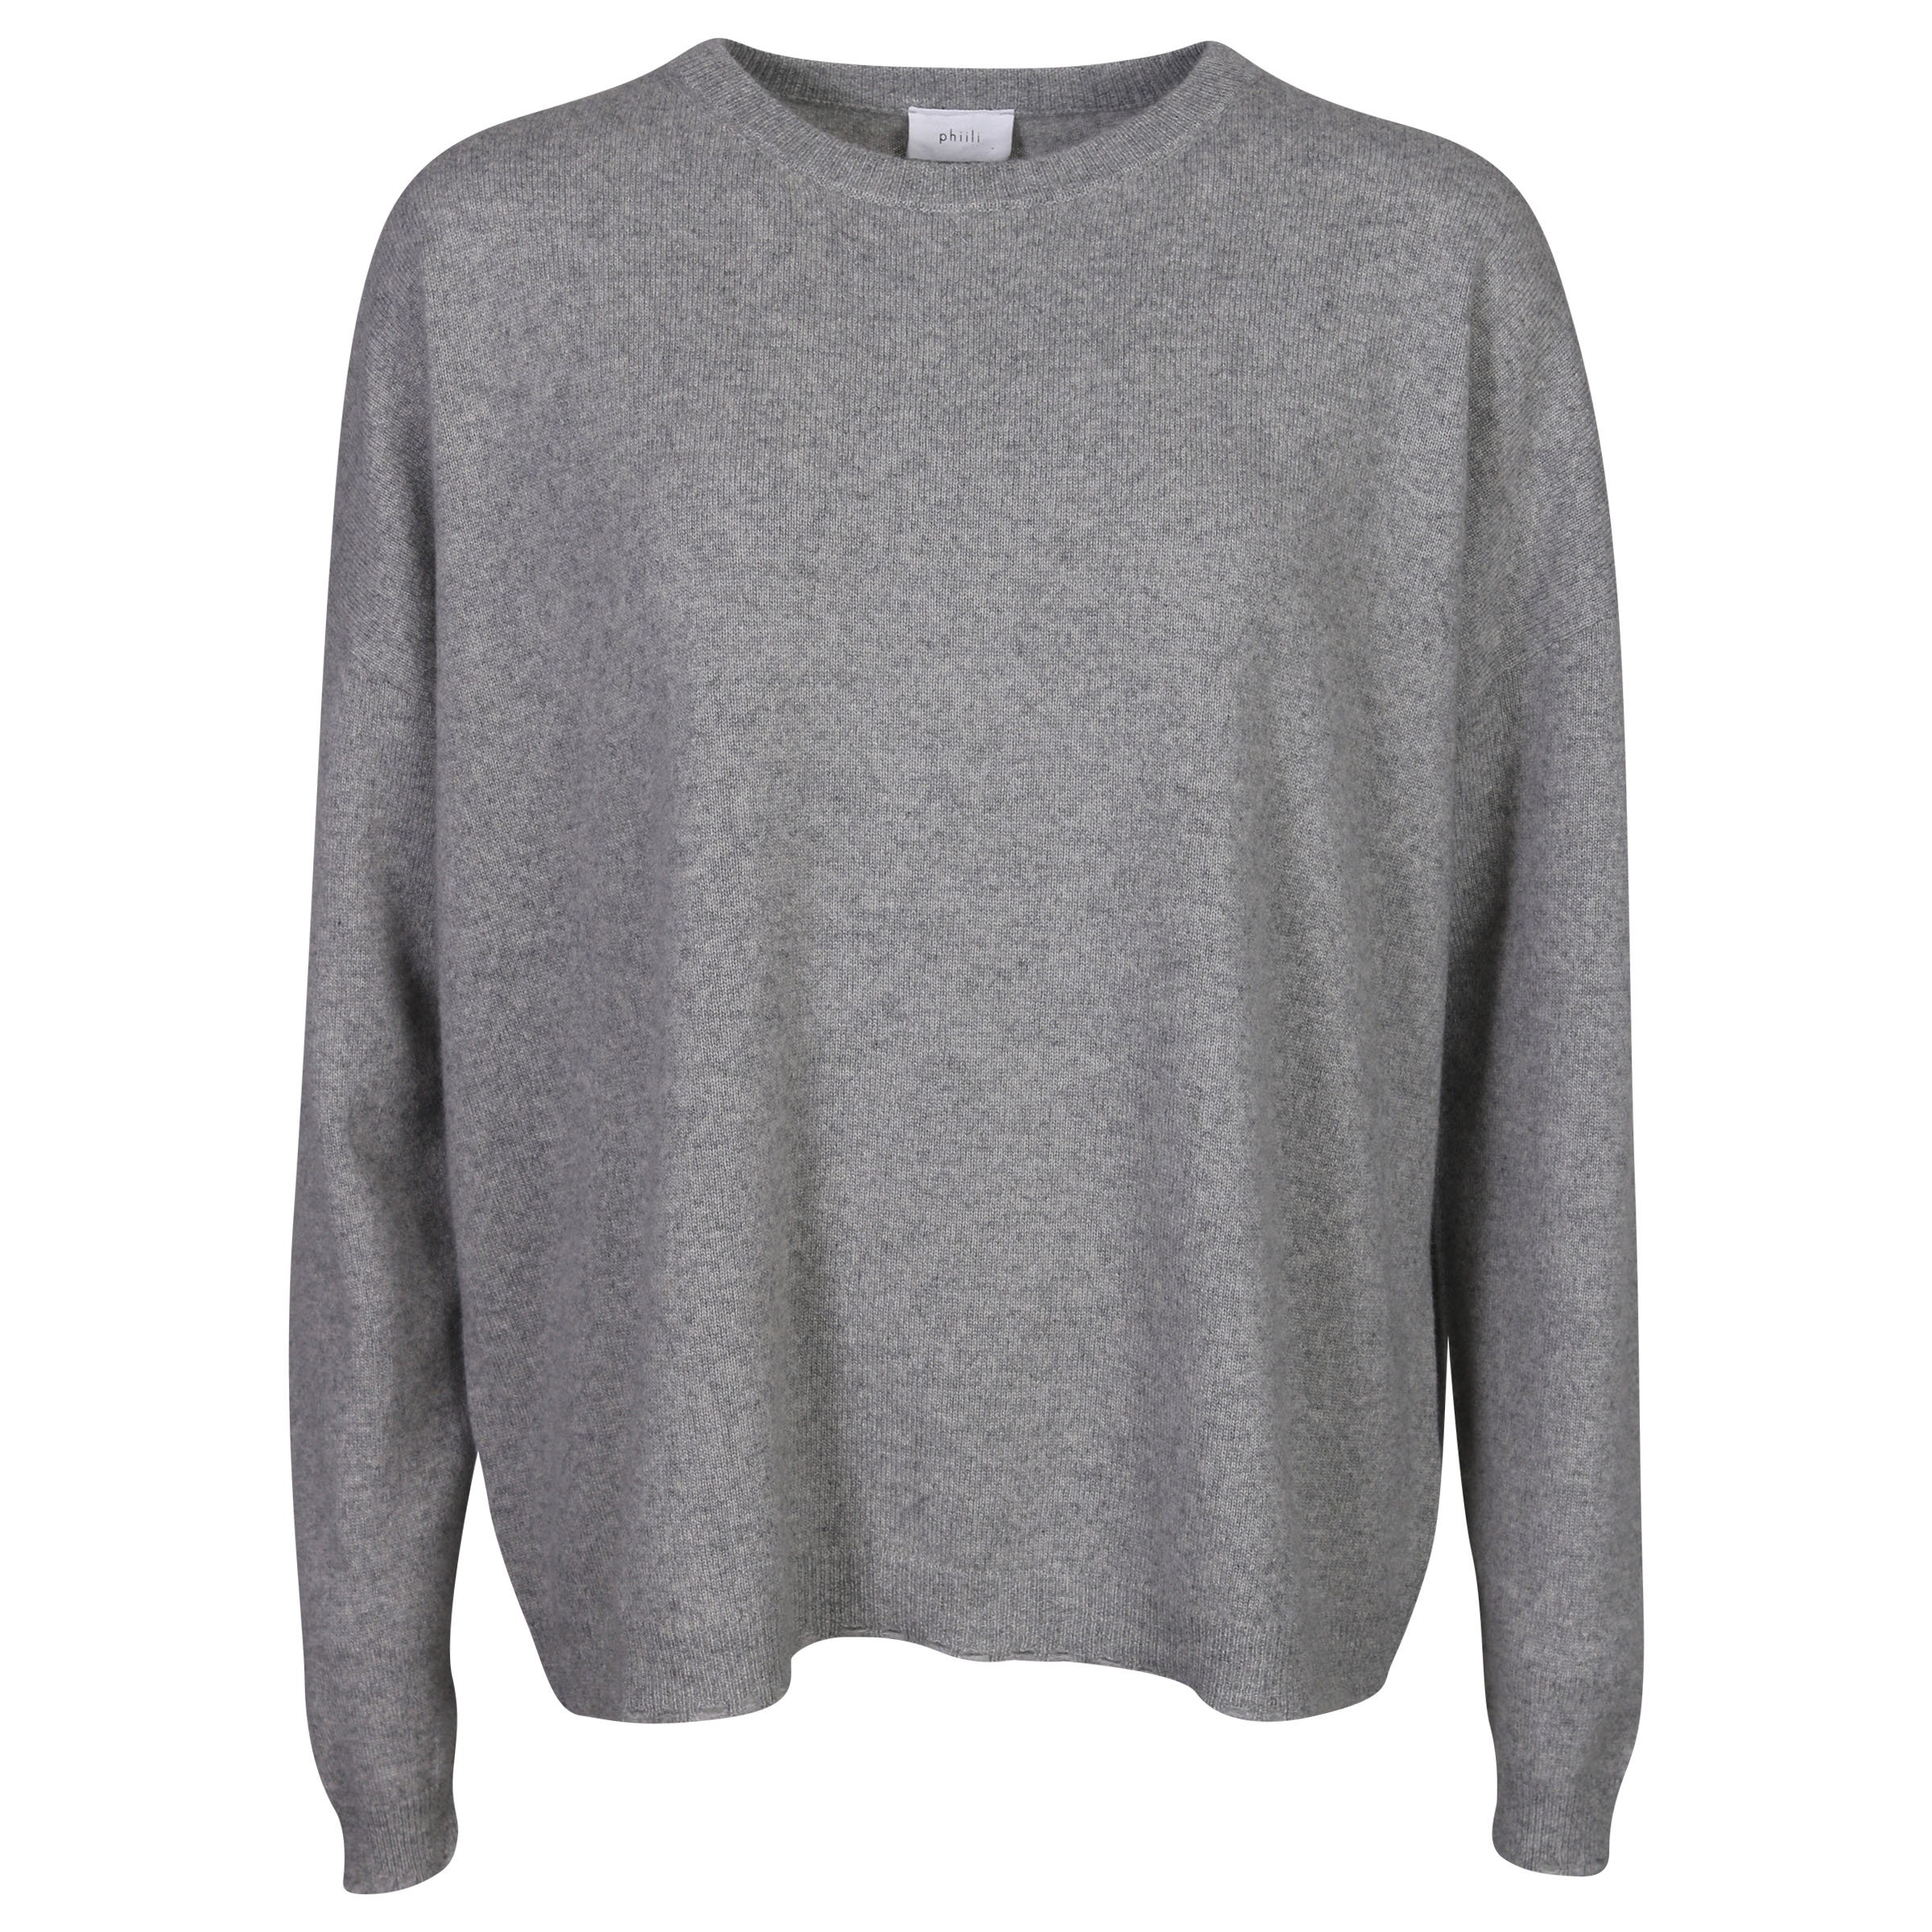 Phiili Recycled Cashmere Sweater in Grey S/M